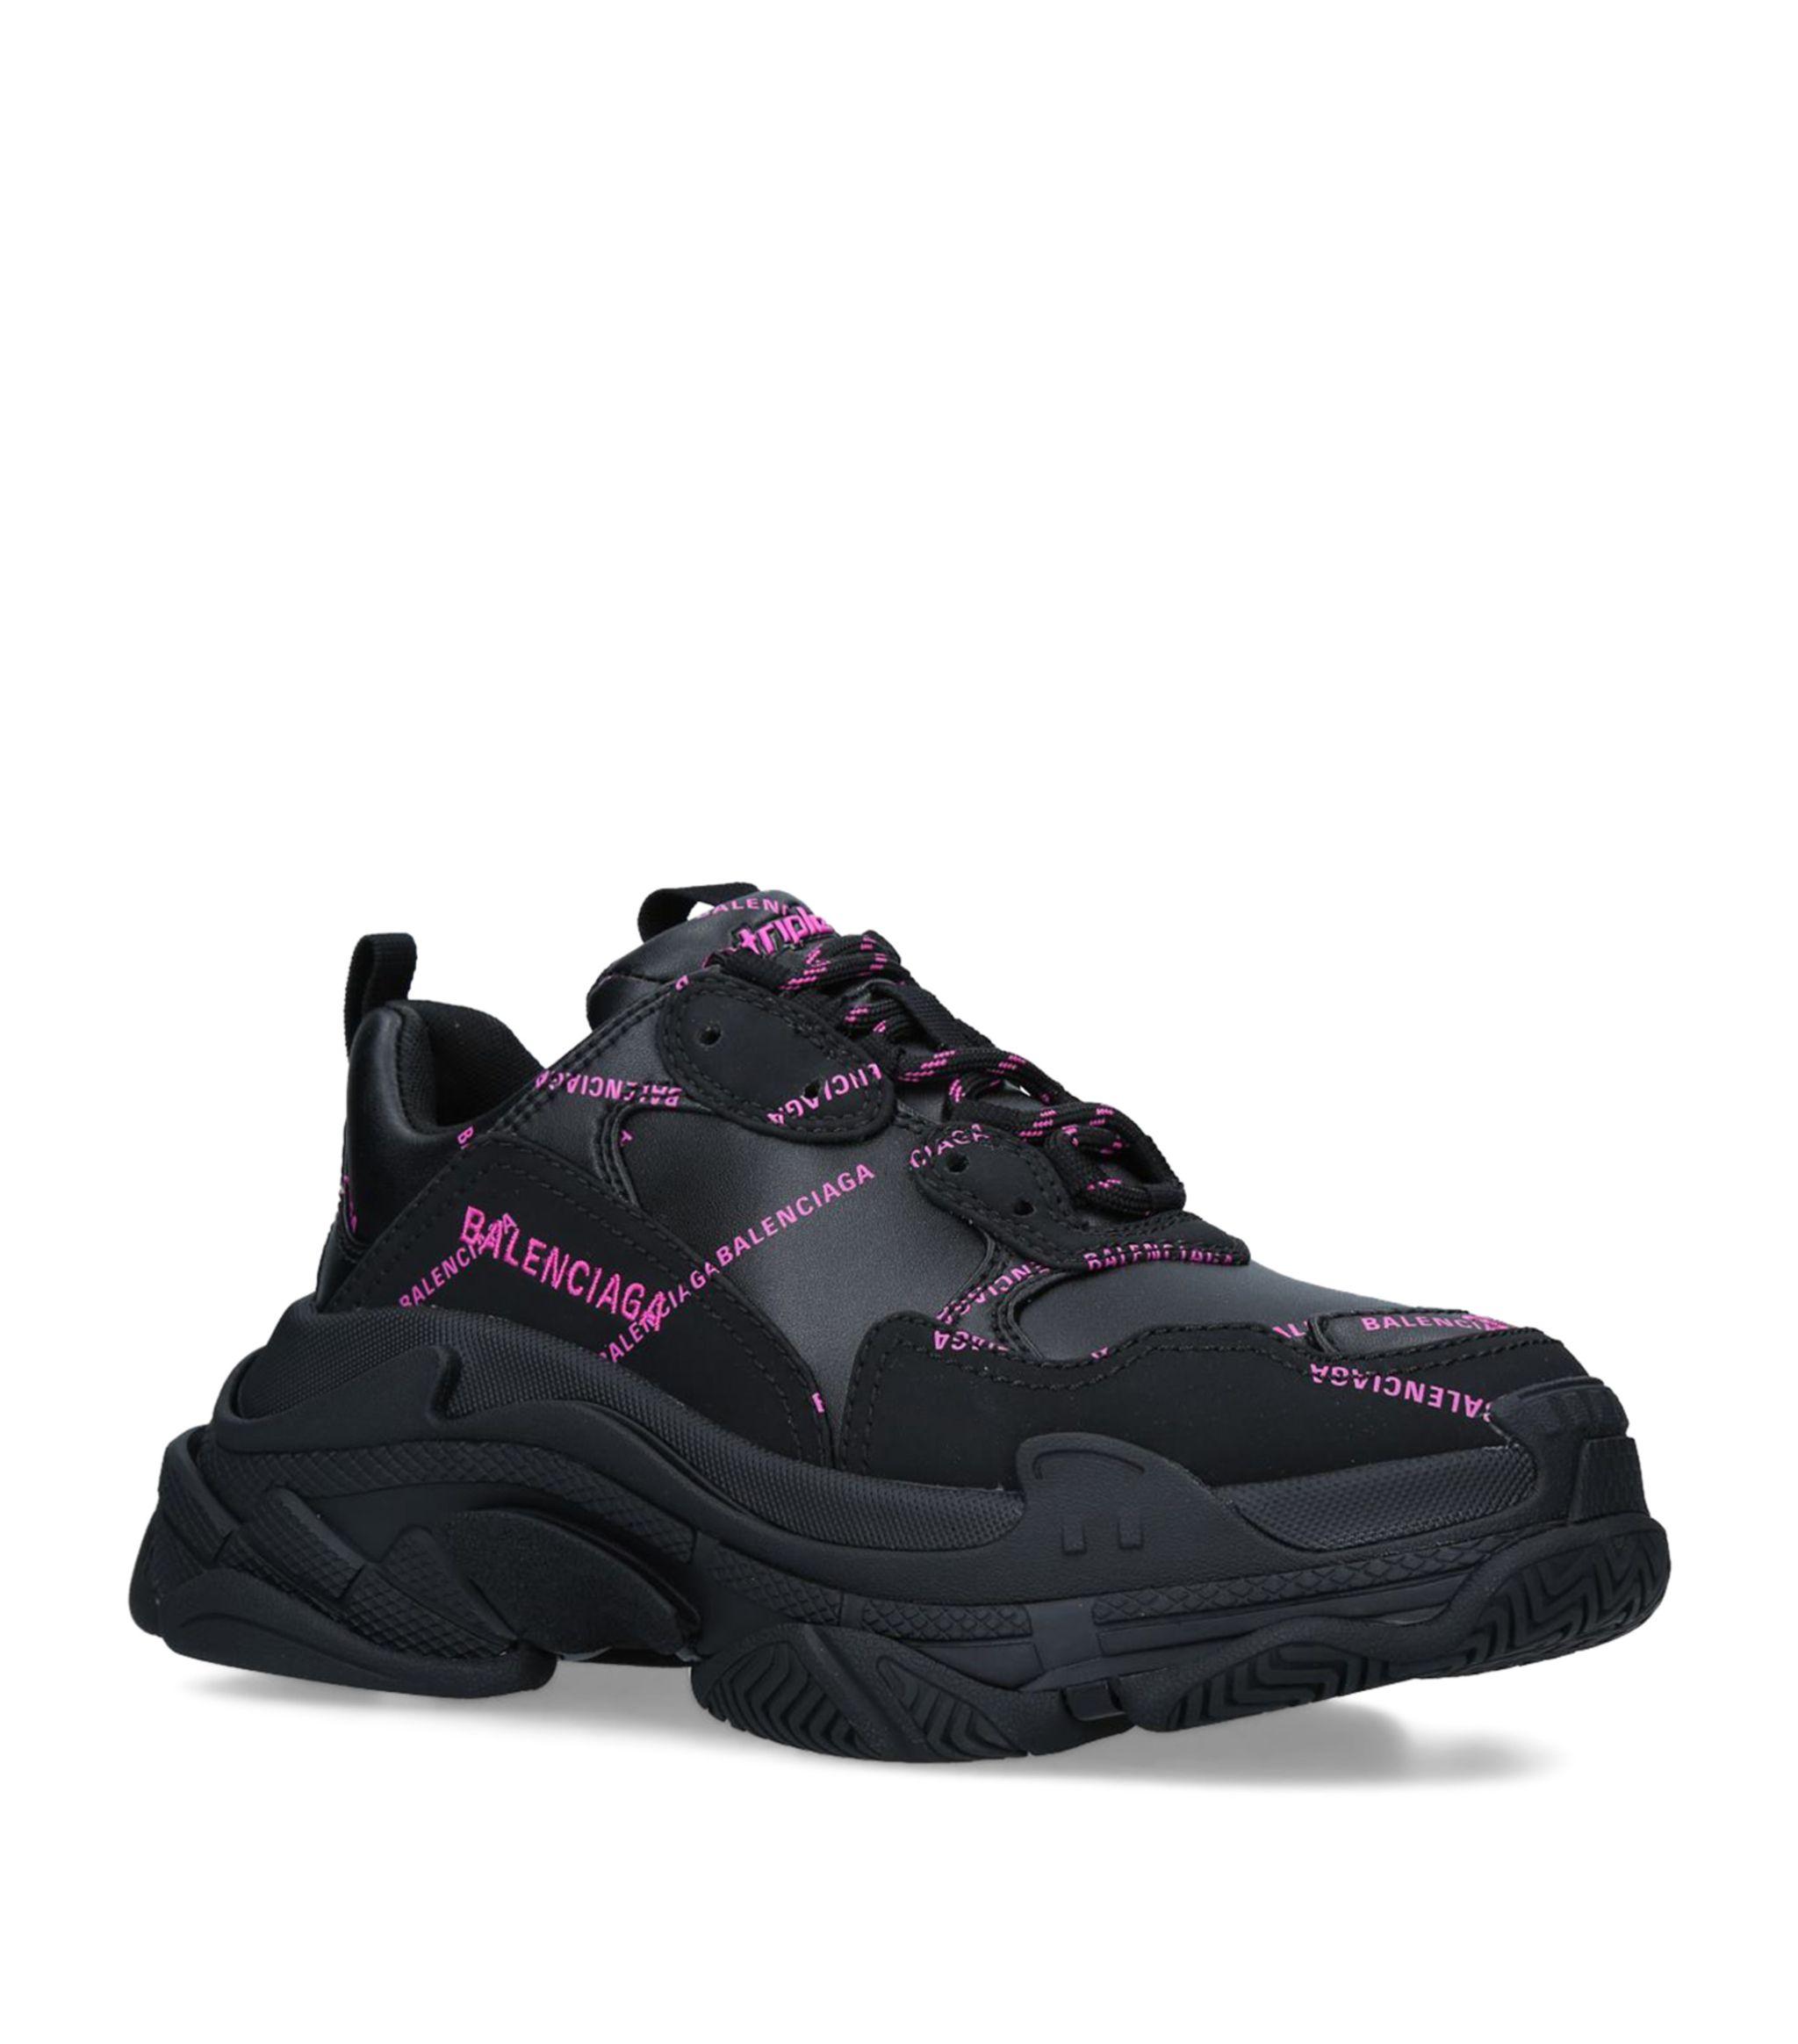 Balenciaga Synthetic Triple S All Over Logo Sneakers Black/pink - Save ...